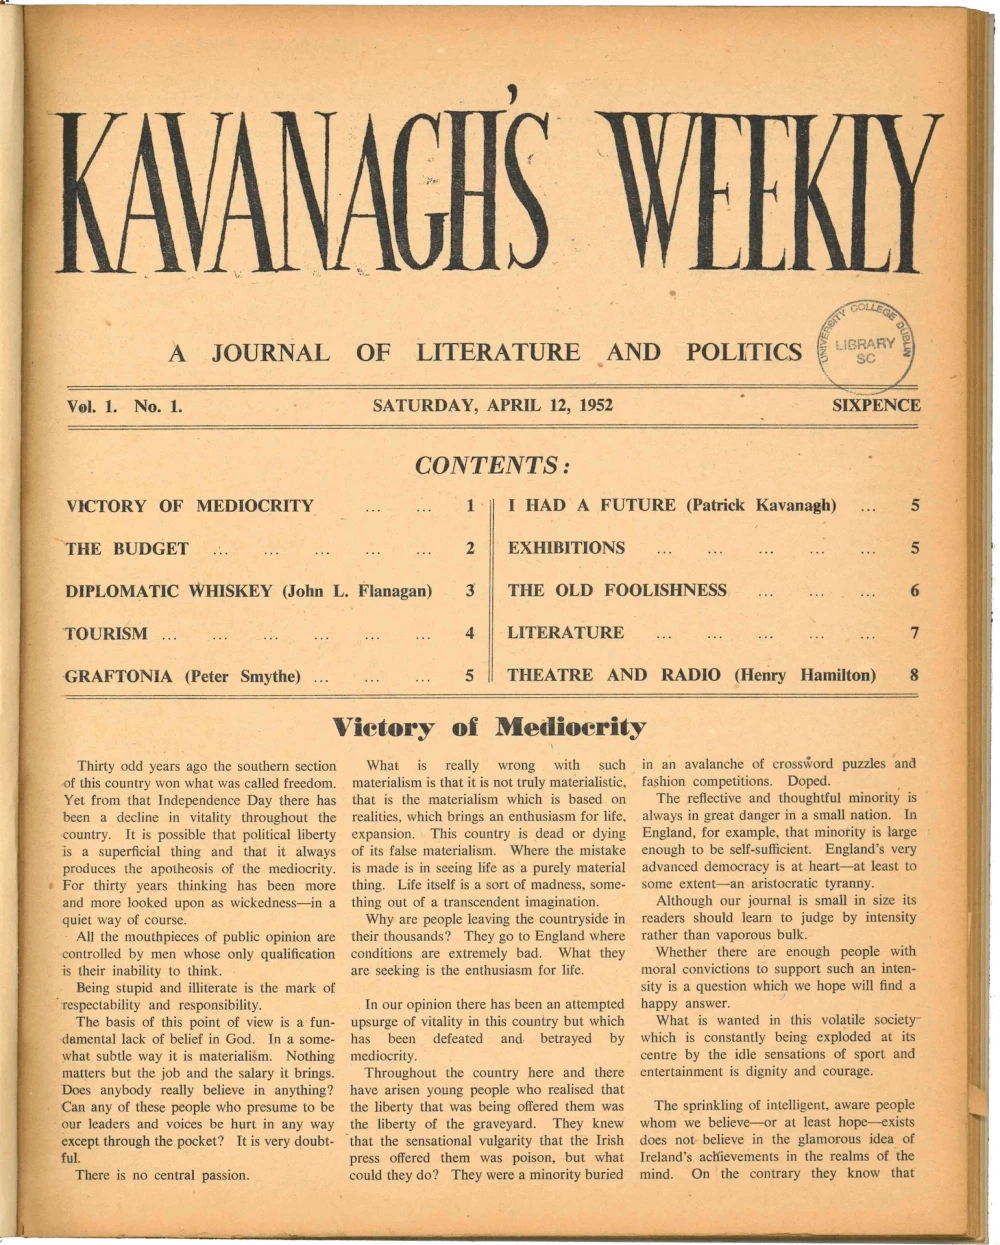 The first page from Kavanagh's Weekly, published 12 April 1952.